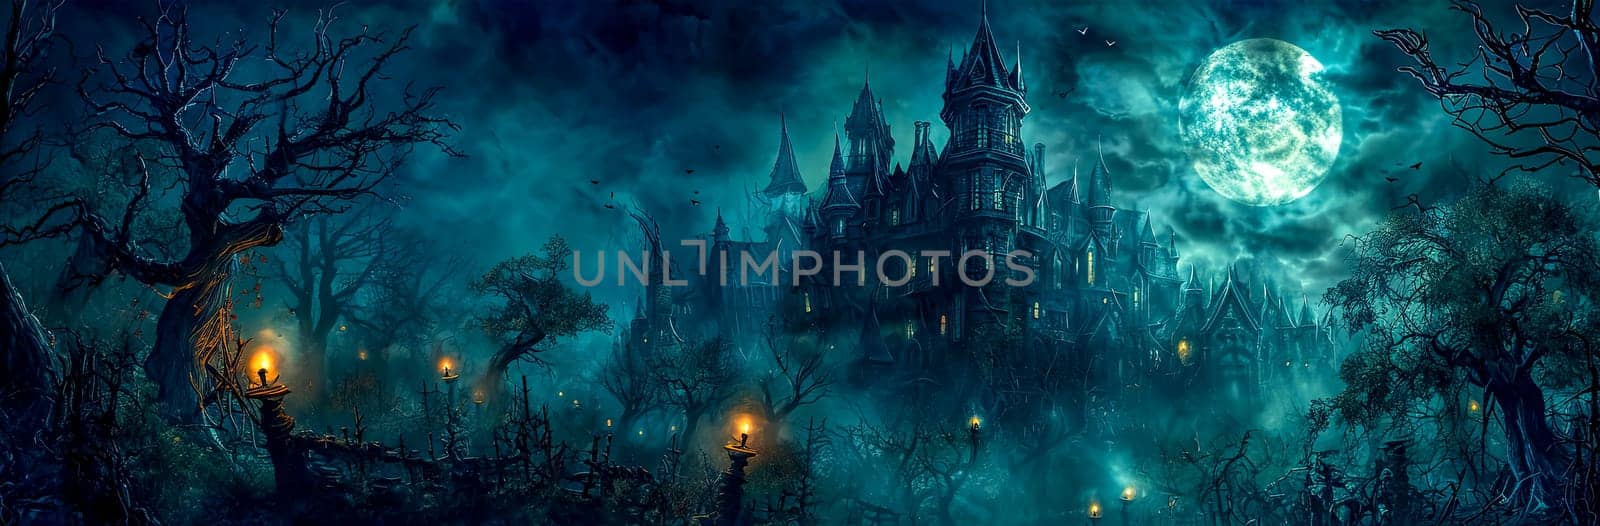 Gothic haunted mansion in a creepy forest under a full moon. by Edophoto